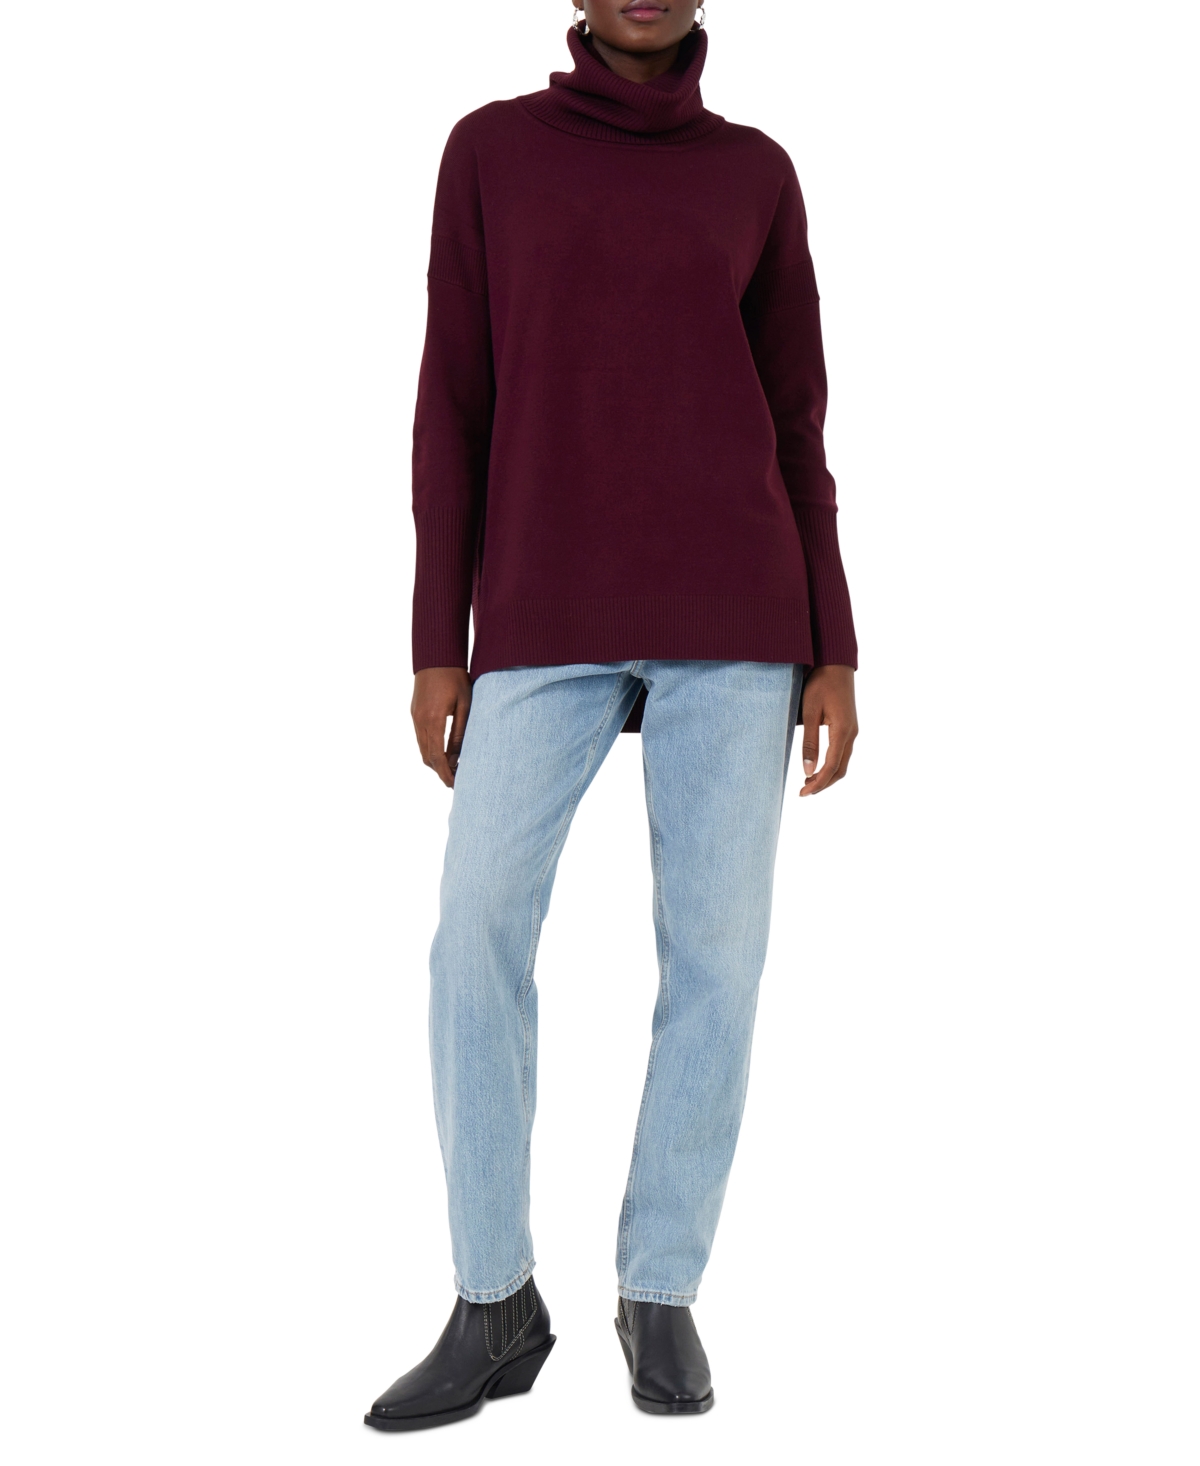 FRENCH CONNECTION WOMEN'S RIBBED COWLNECK SWEATER